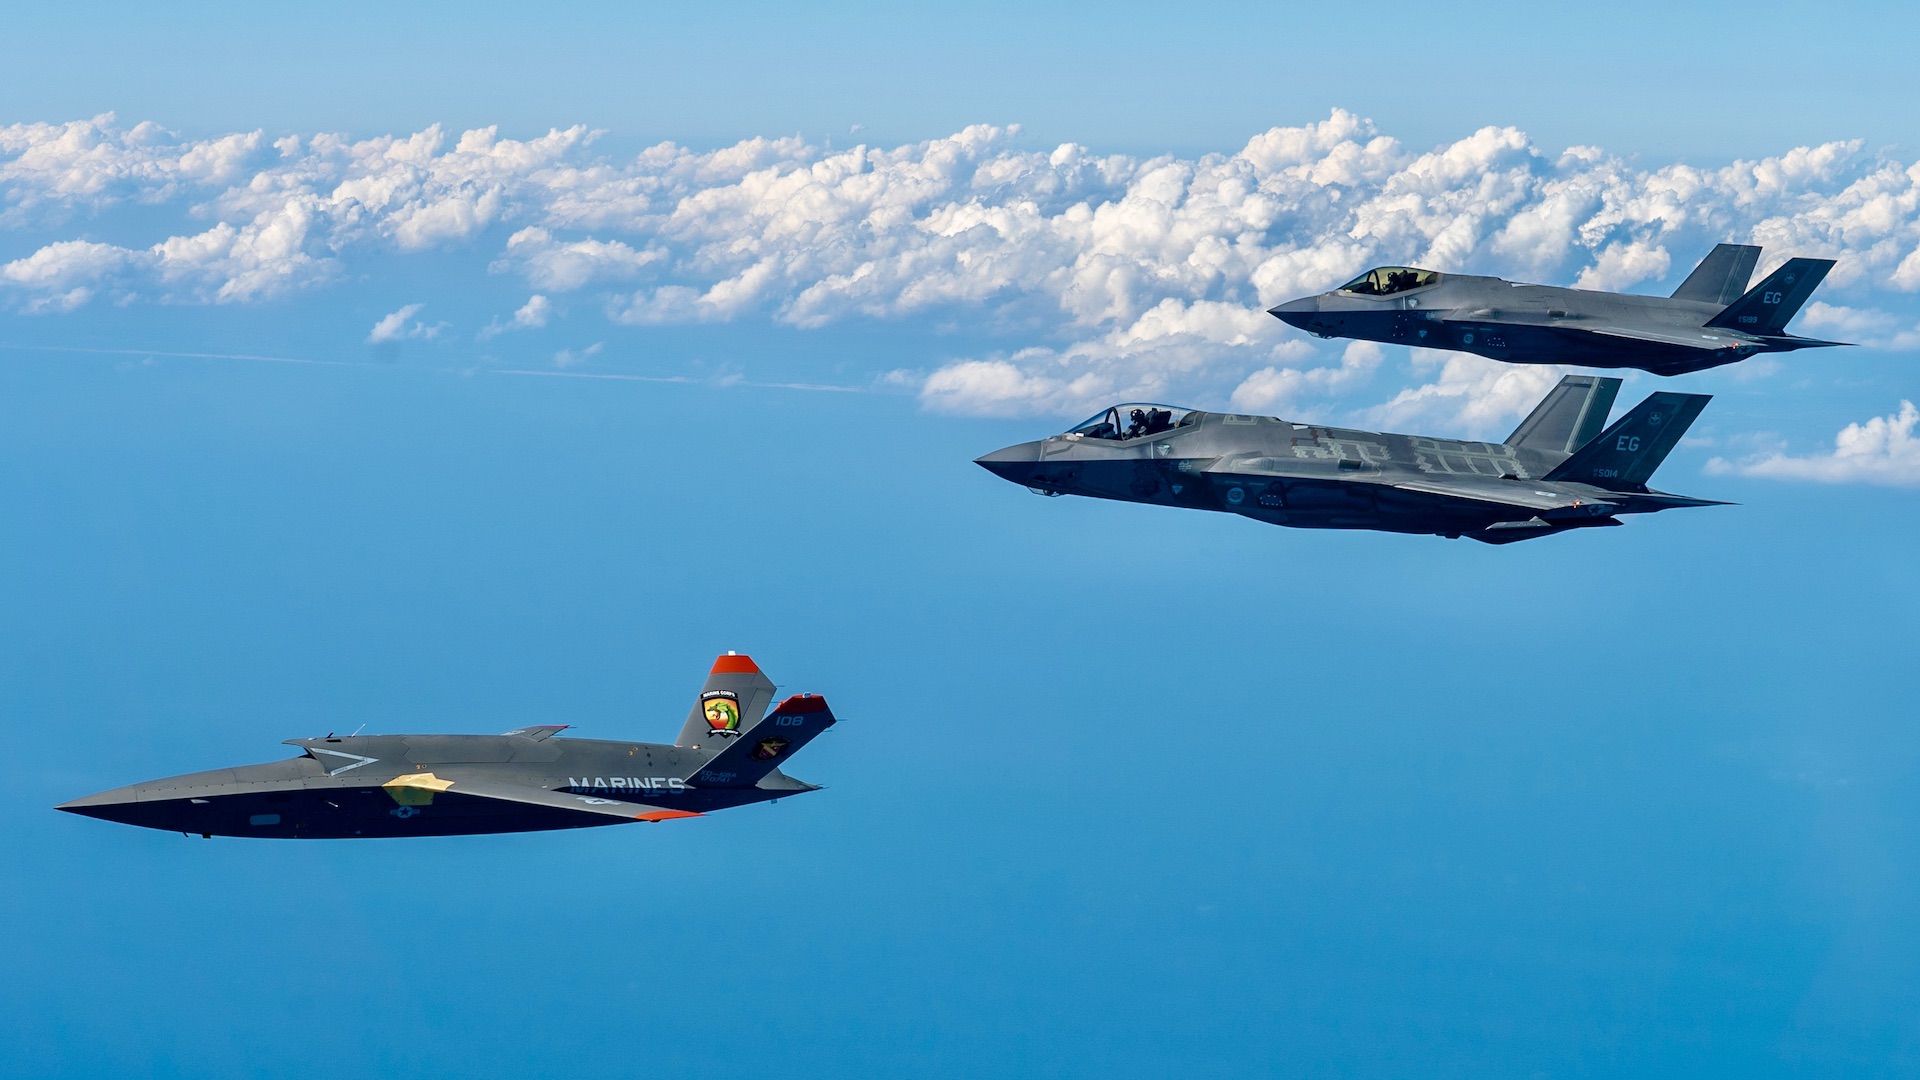 A U.S. Marine Corps XQ-58A Valkyrie, highly autonomous, low-cost tactical unmanned air vehicle, conducts its second test flight with two U.S. Air Force F-35A Lightning II aircraft assigned to 33rd Fighter Wing, 96th Test Wing at Eglin Air Force Base, Fla., Feb. 23, 2023. The XQ-58A Valkyrie test flight and the data collected inform future requirements for the Marine Corps in a rapidly evolving security environment, while successfully fueling joint innovation and experimentation opportunities. (U.S. Air Force photo by Master Sgt. John McRell)